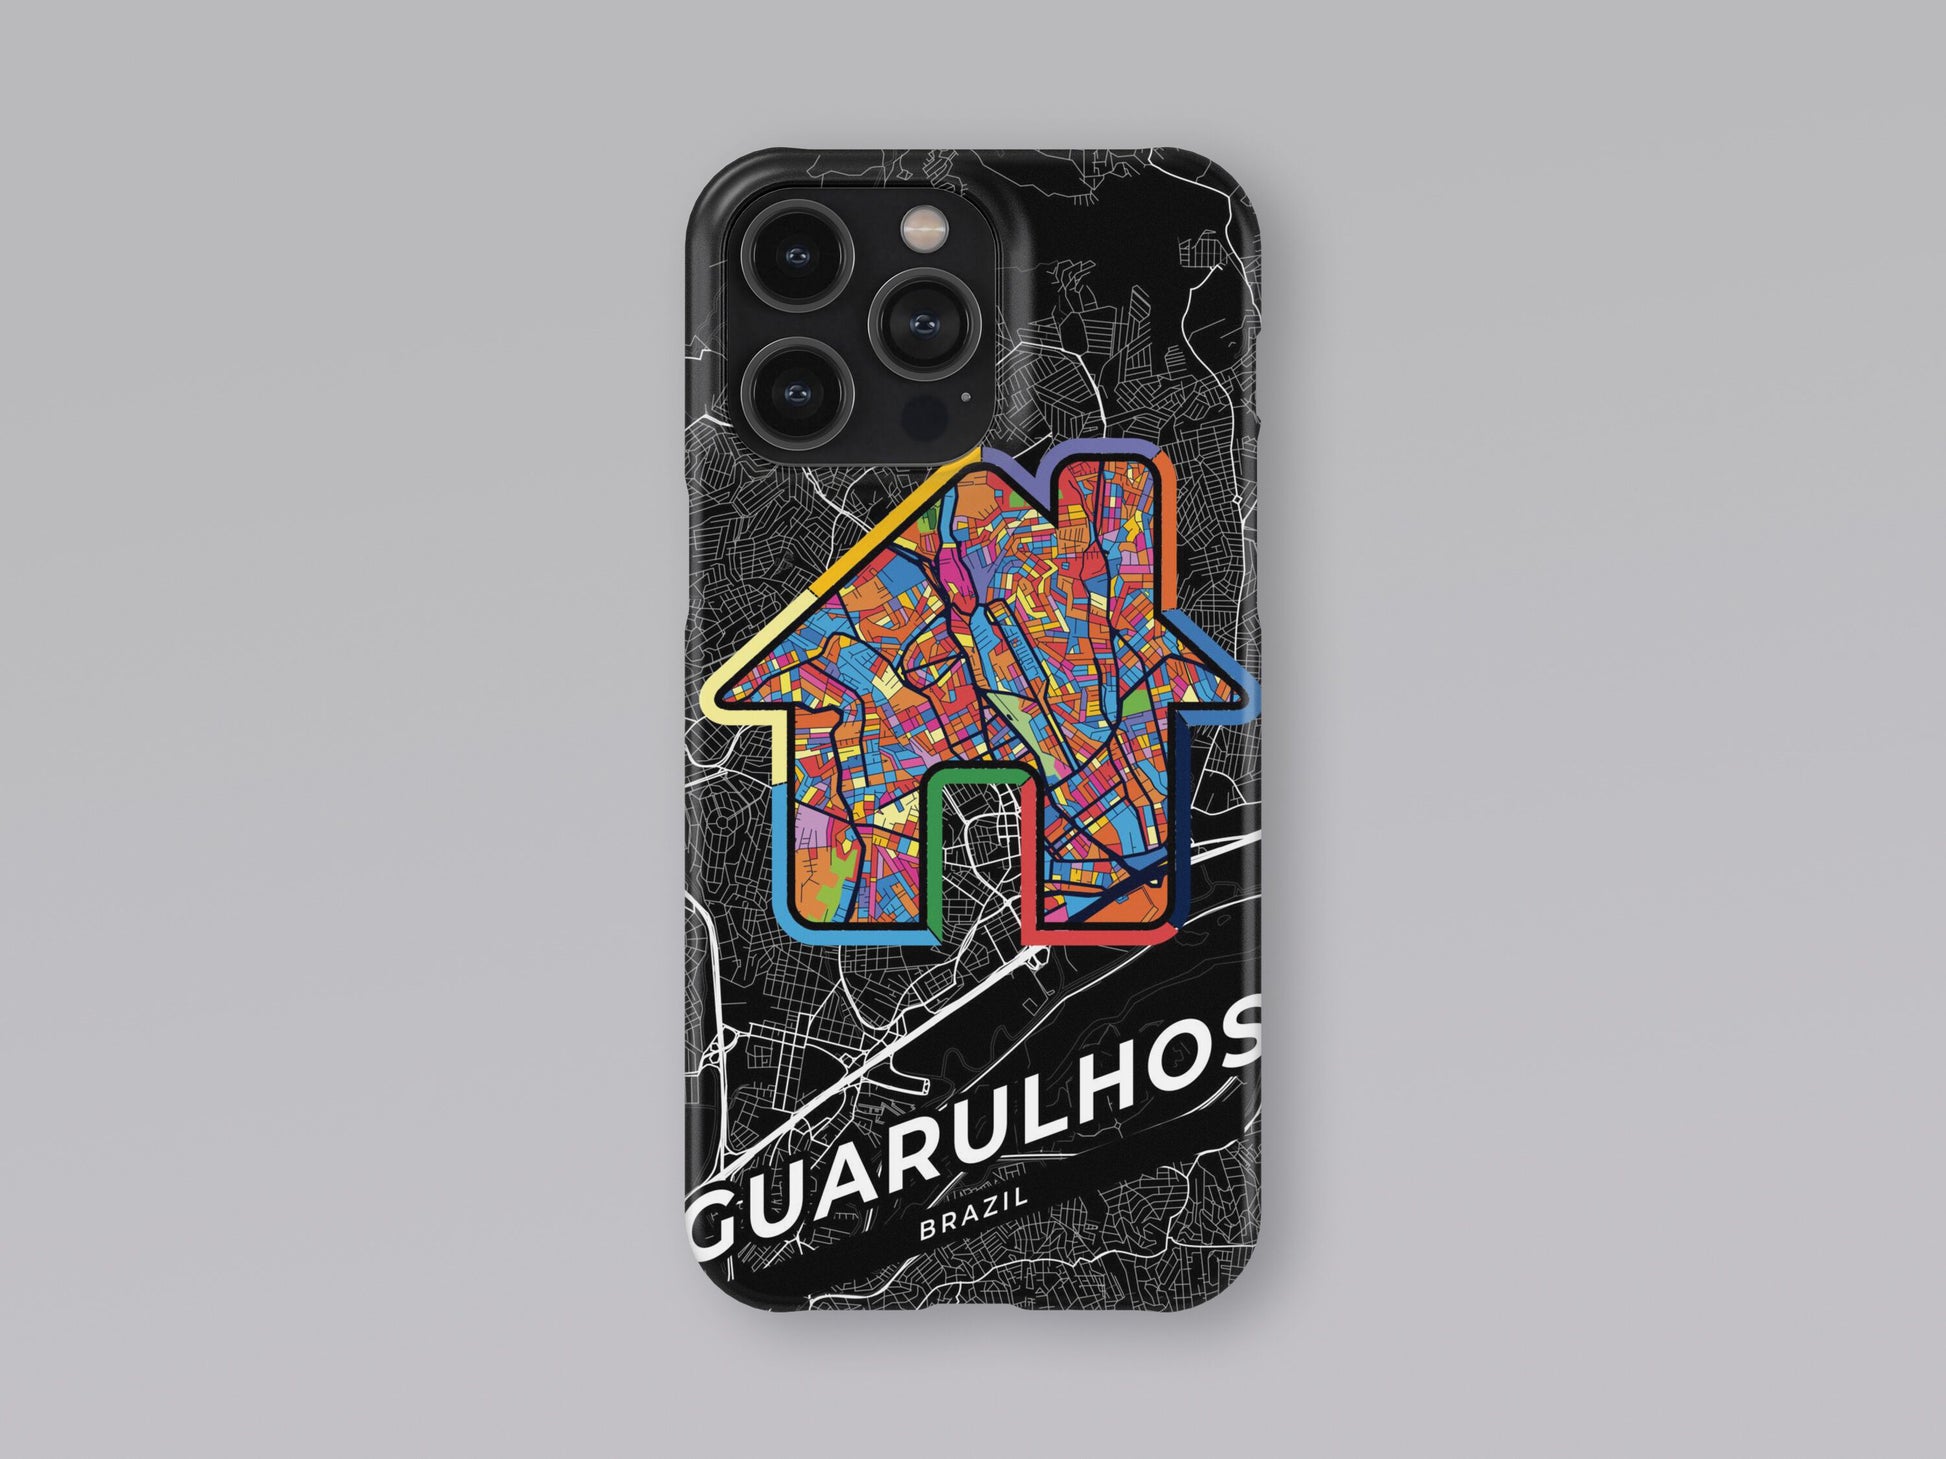 Guarulhos Brazil slim phone case with colorful icon. Birthday, wedding or housewarming gift. Couple match cases. 3